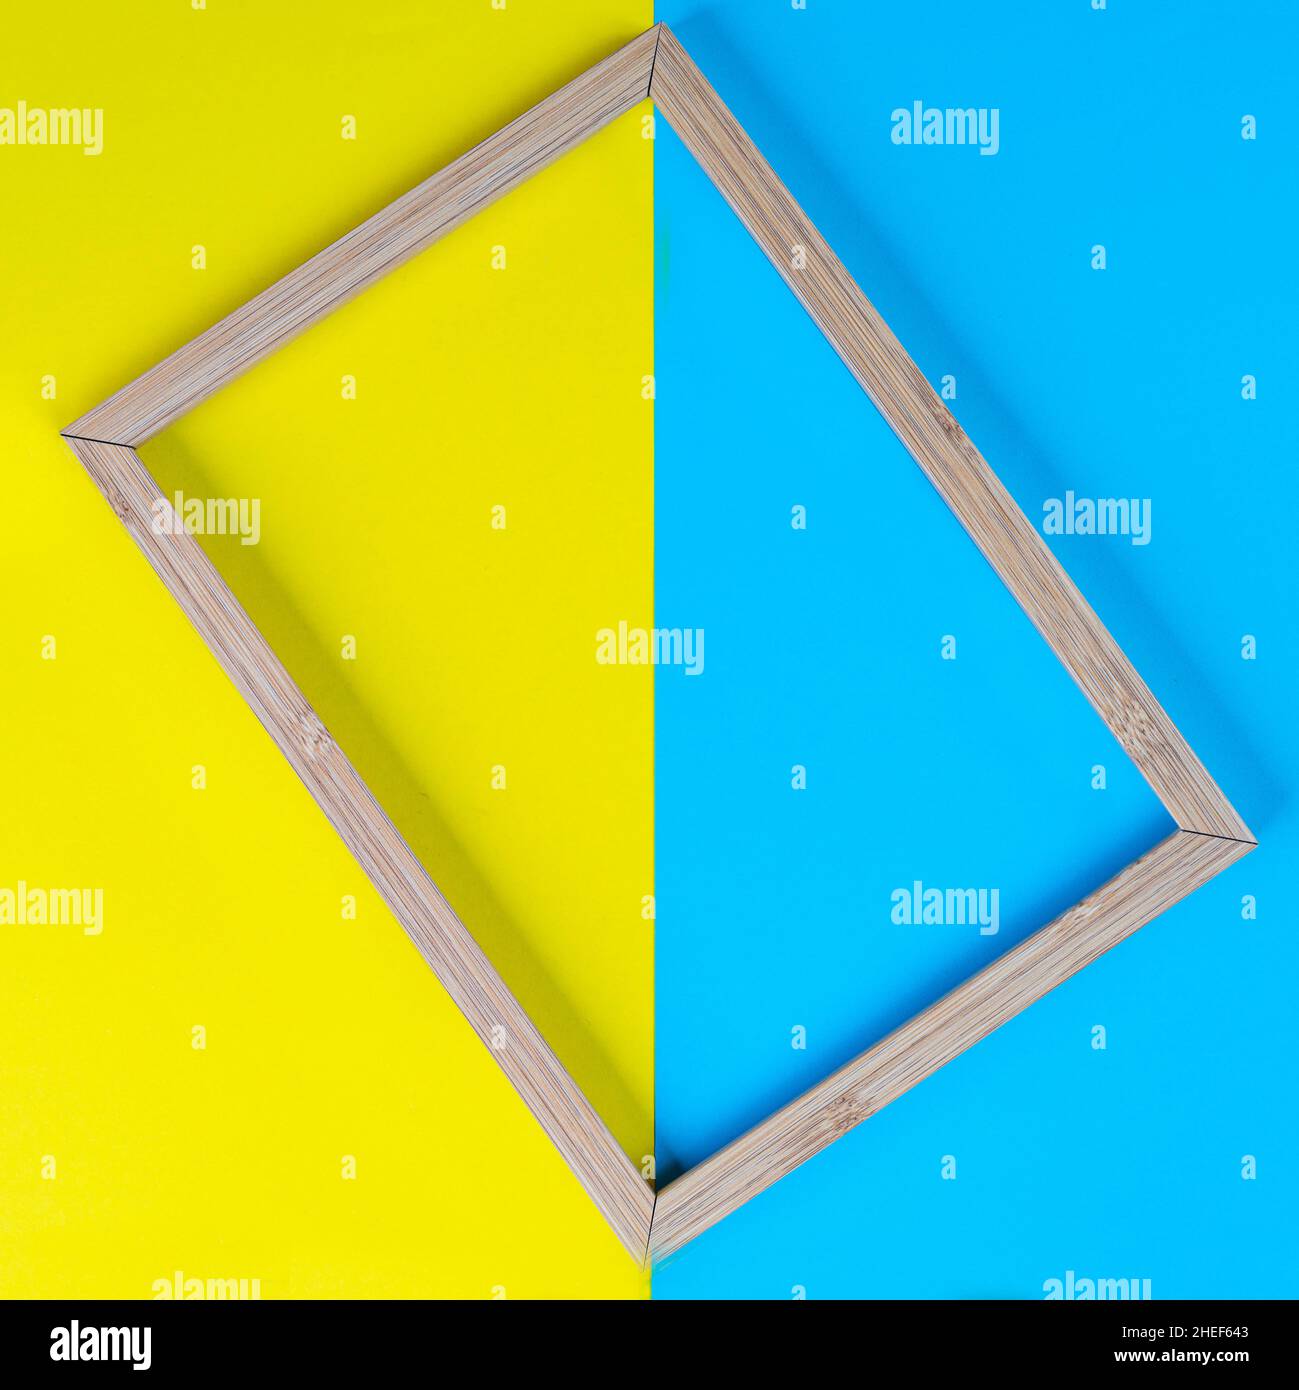 a wooden frame on a background of colored shapes Stock Photo